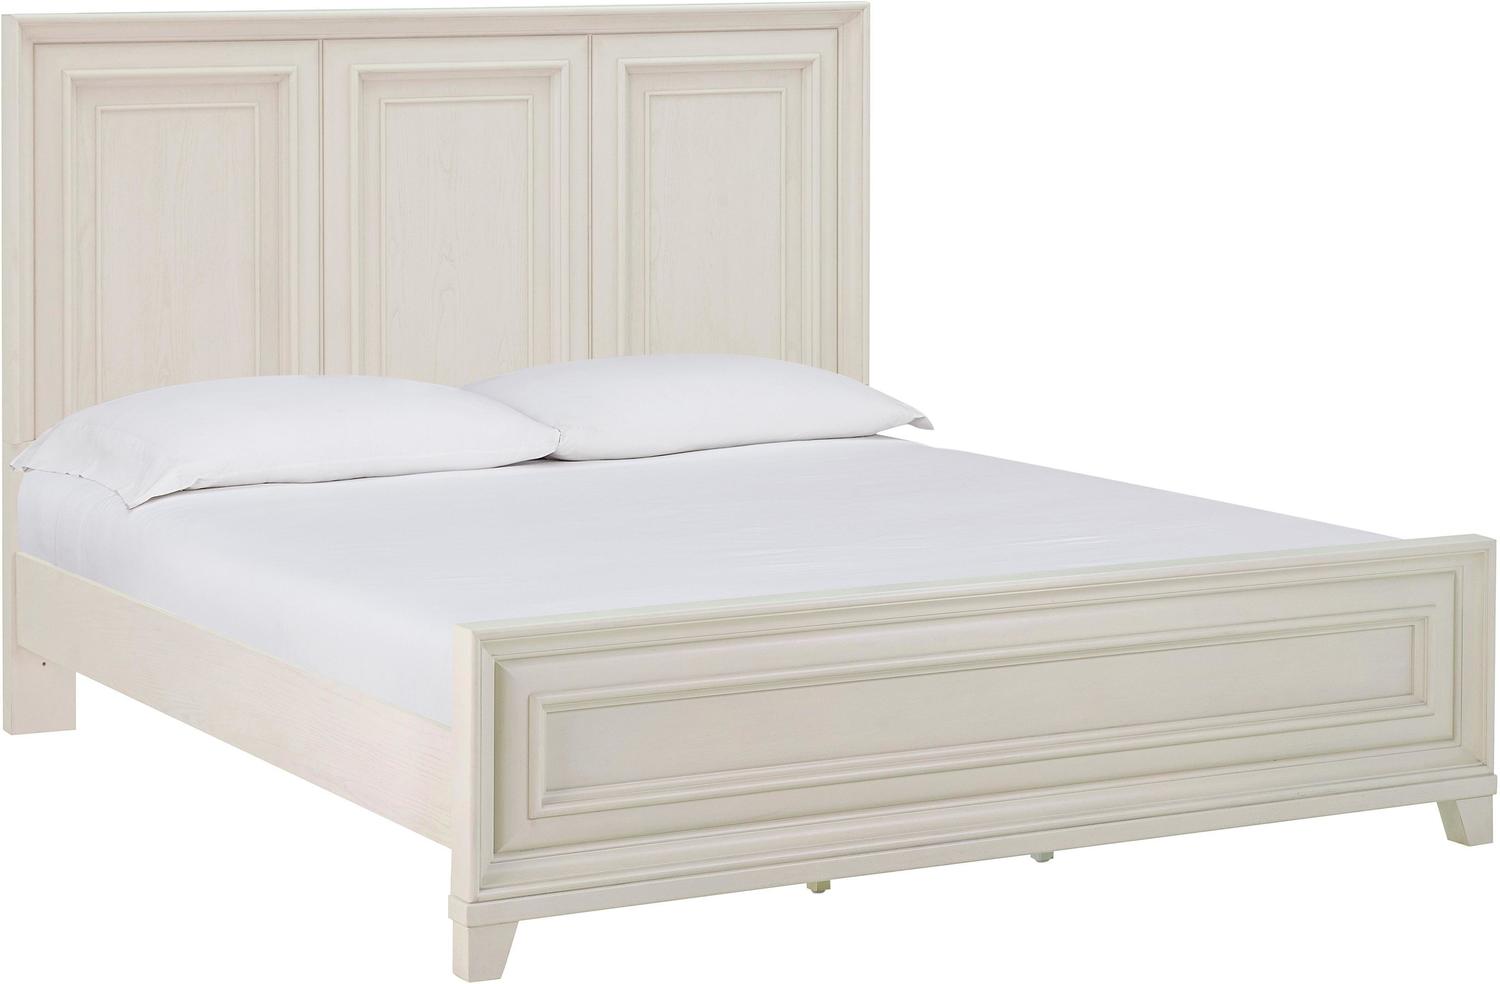 Tov Furniture Beds Beds White